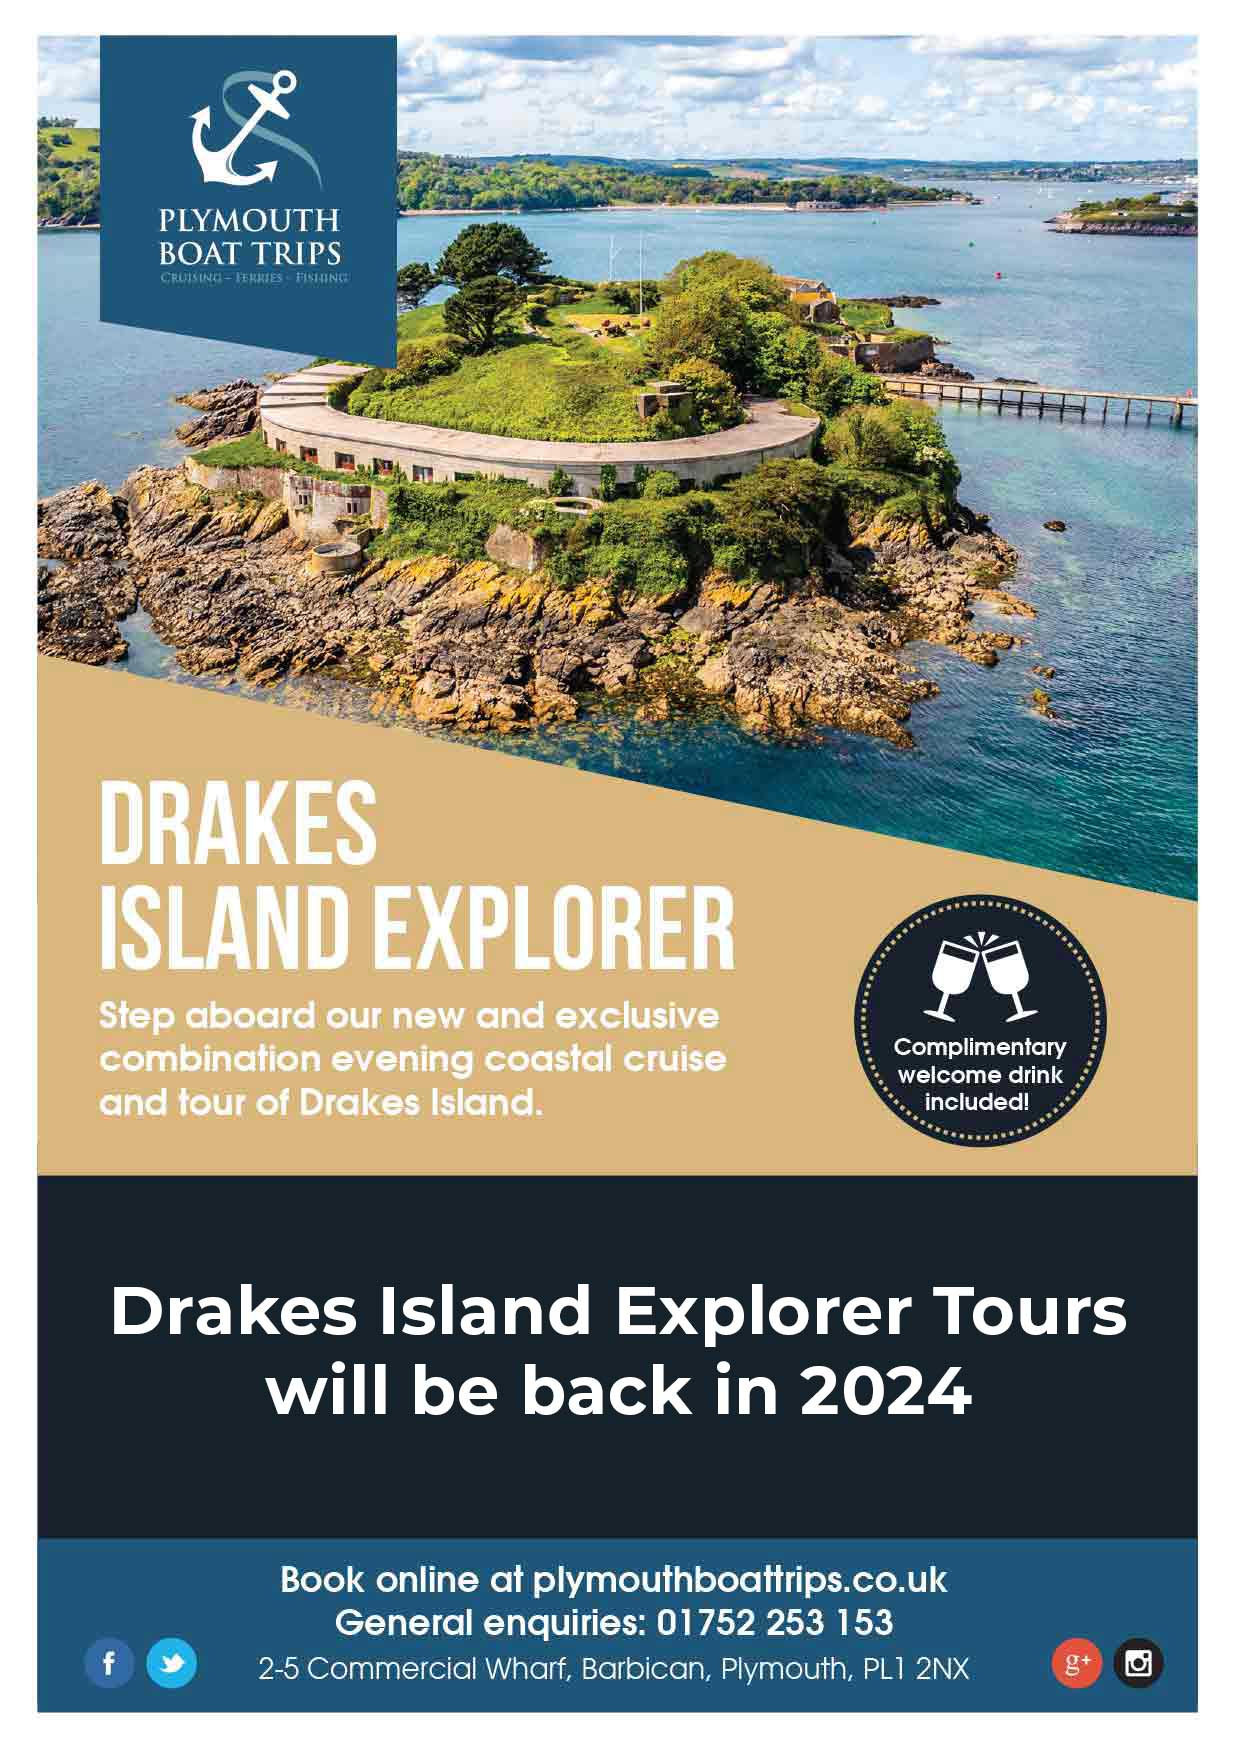 Drakes Island Explorer Tours will be back in 2024